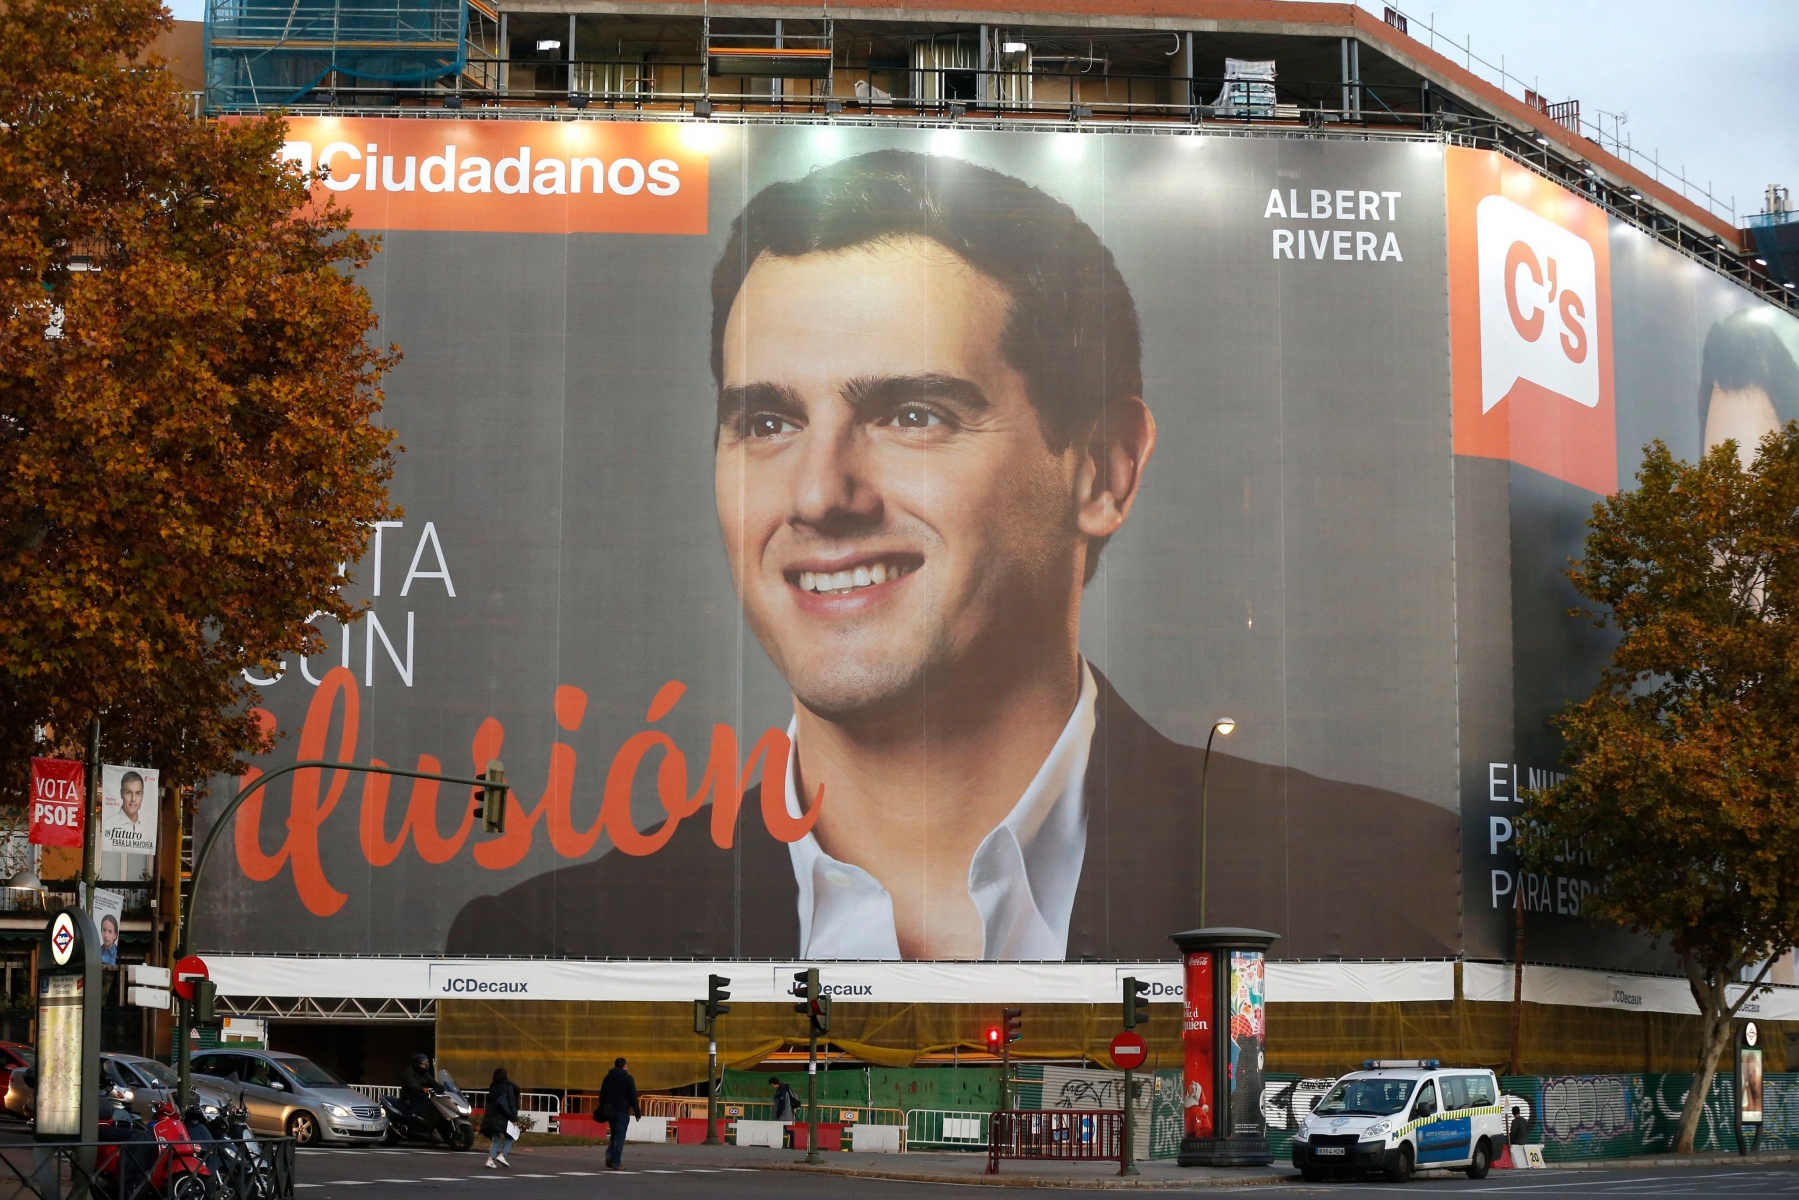 epa05070322 View of the electoral poster of presidenttial candidate Albert Rivera of Ciudadanos party at Atocha station in Madrid, Spain on 15 December 2015. Spain wil hold general elections upcoming 20 December 2015.  EPA/KIKO HUESCA SPAIN GENERAL ELECTIONS